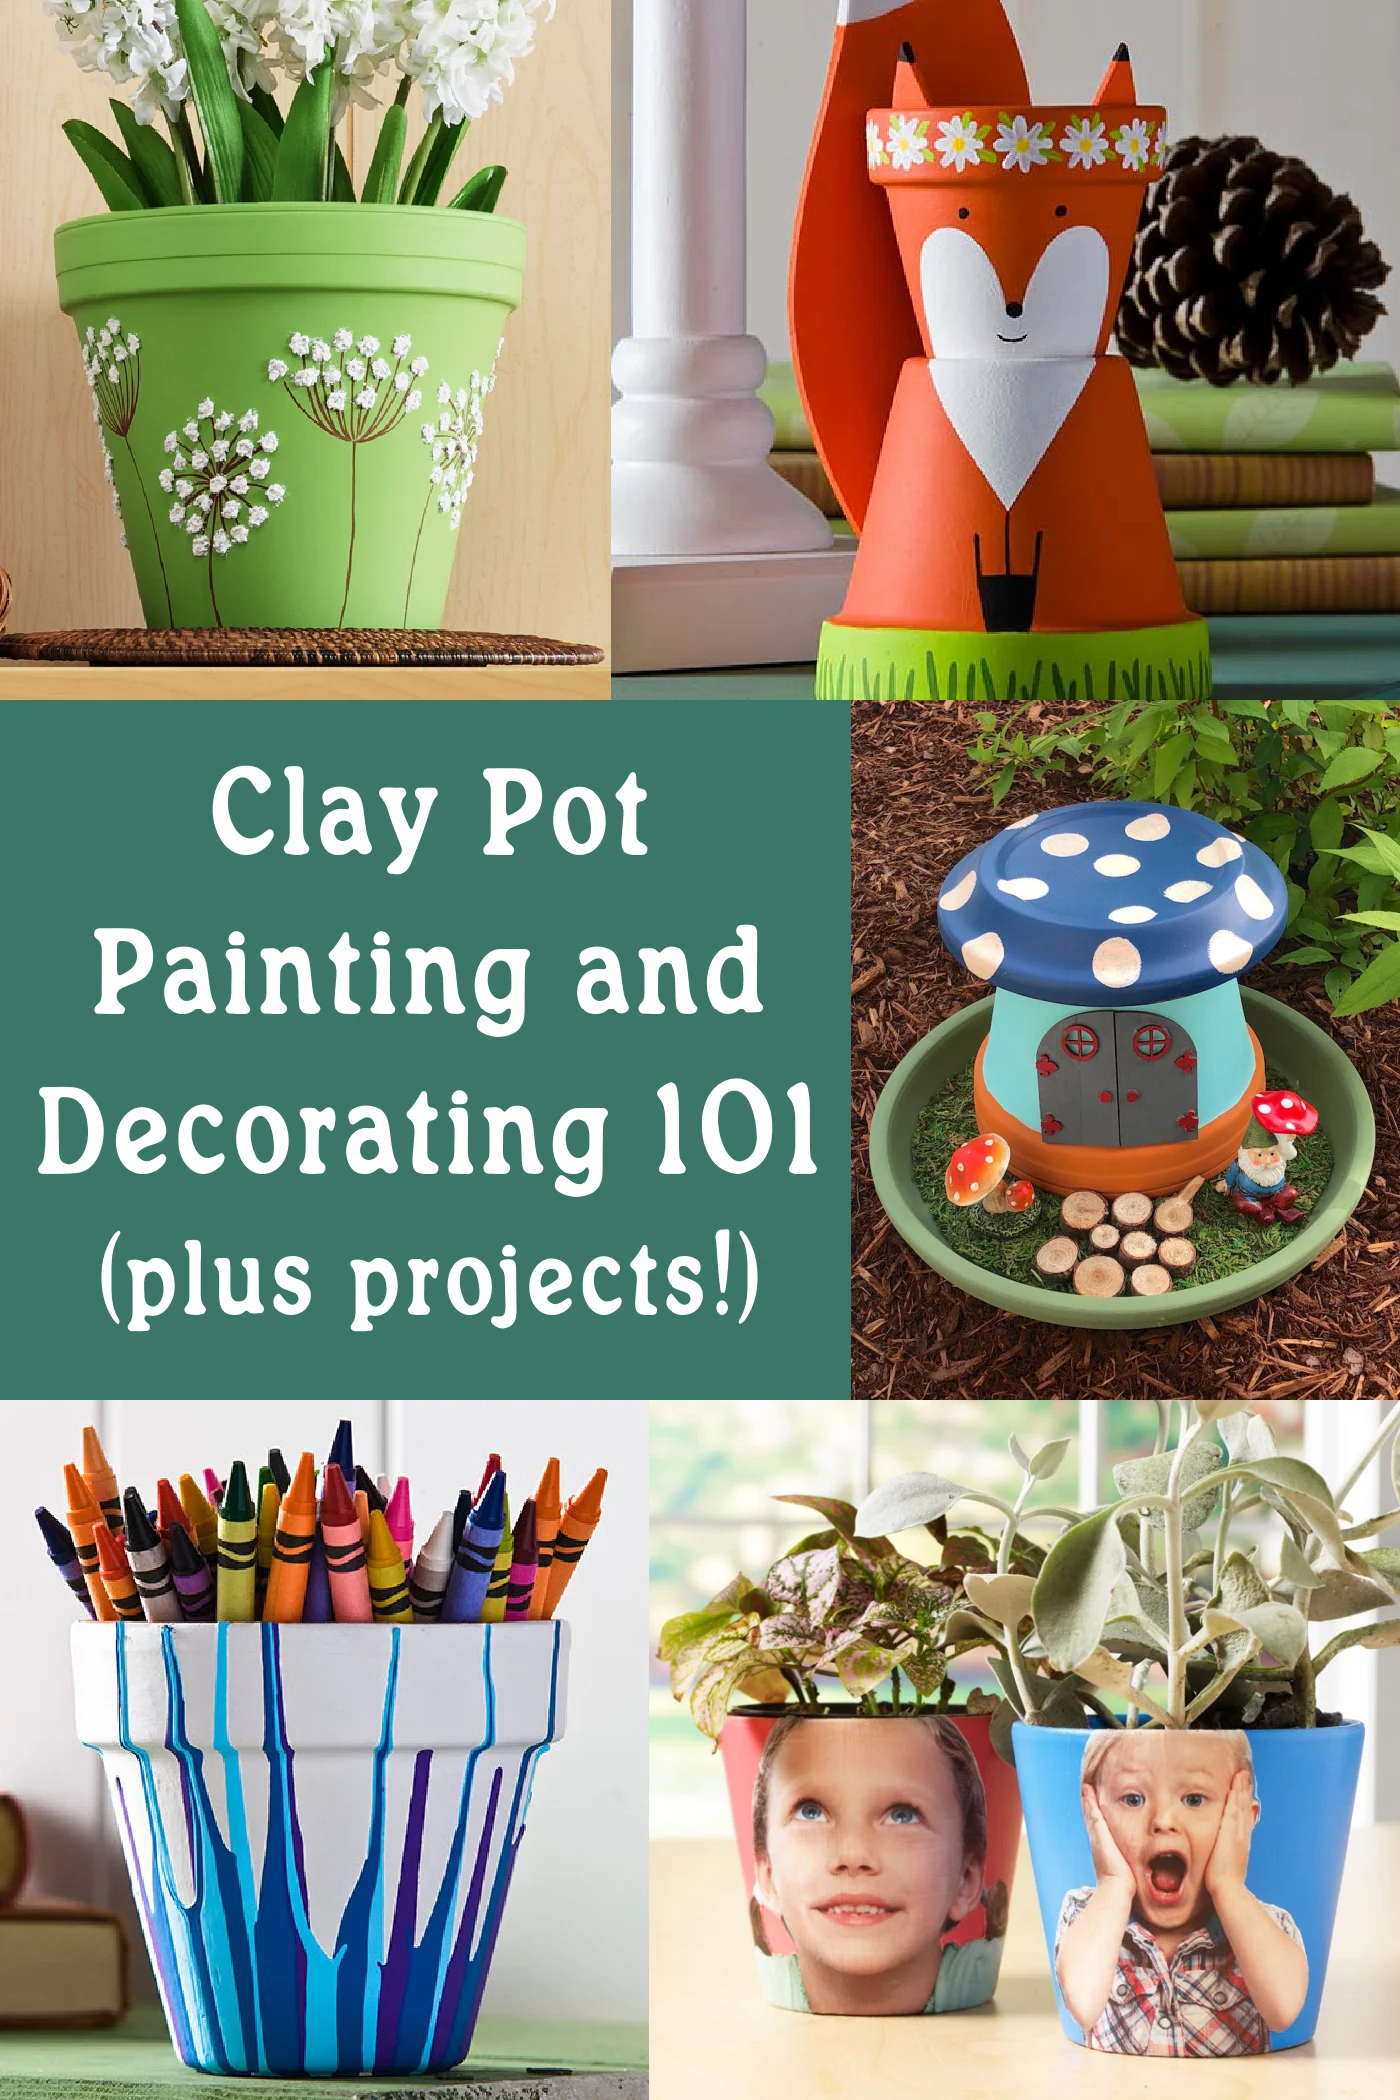 Can You Paint Clay With Watercolor Paint? - Crafty Art Ideas